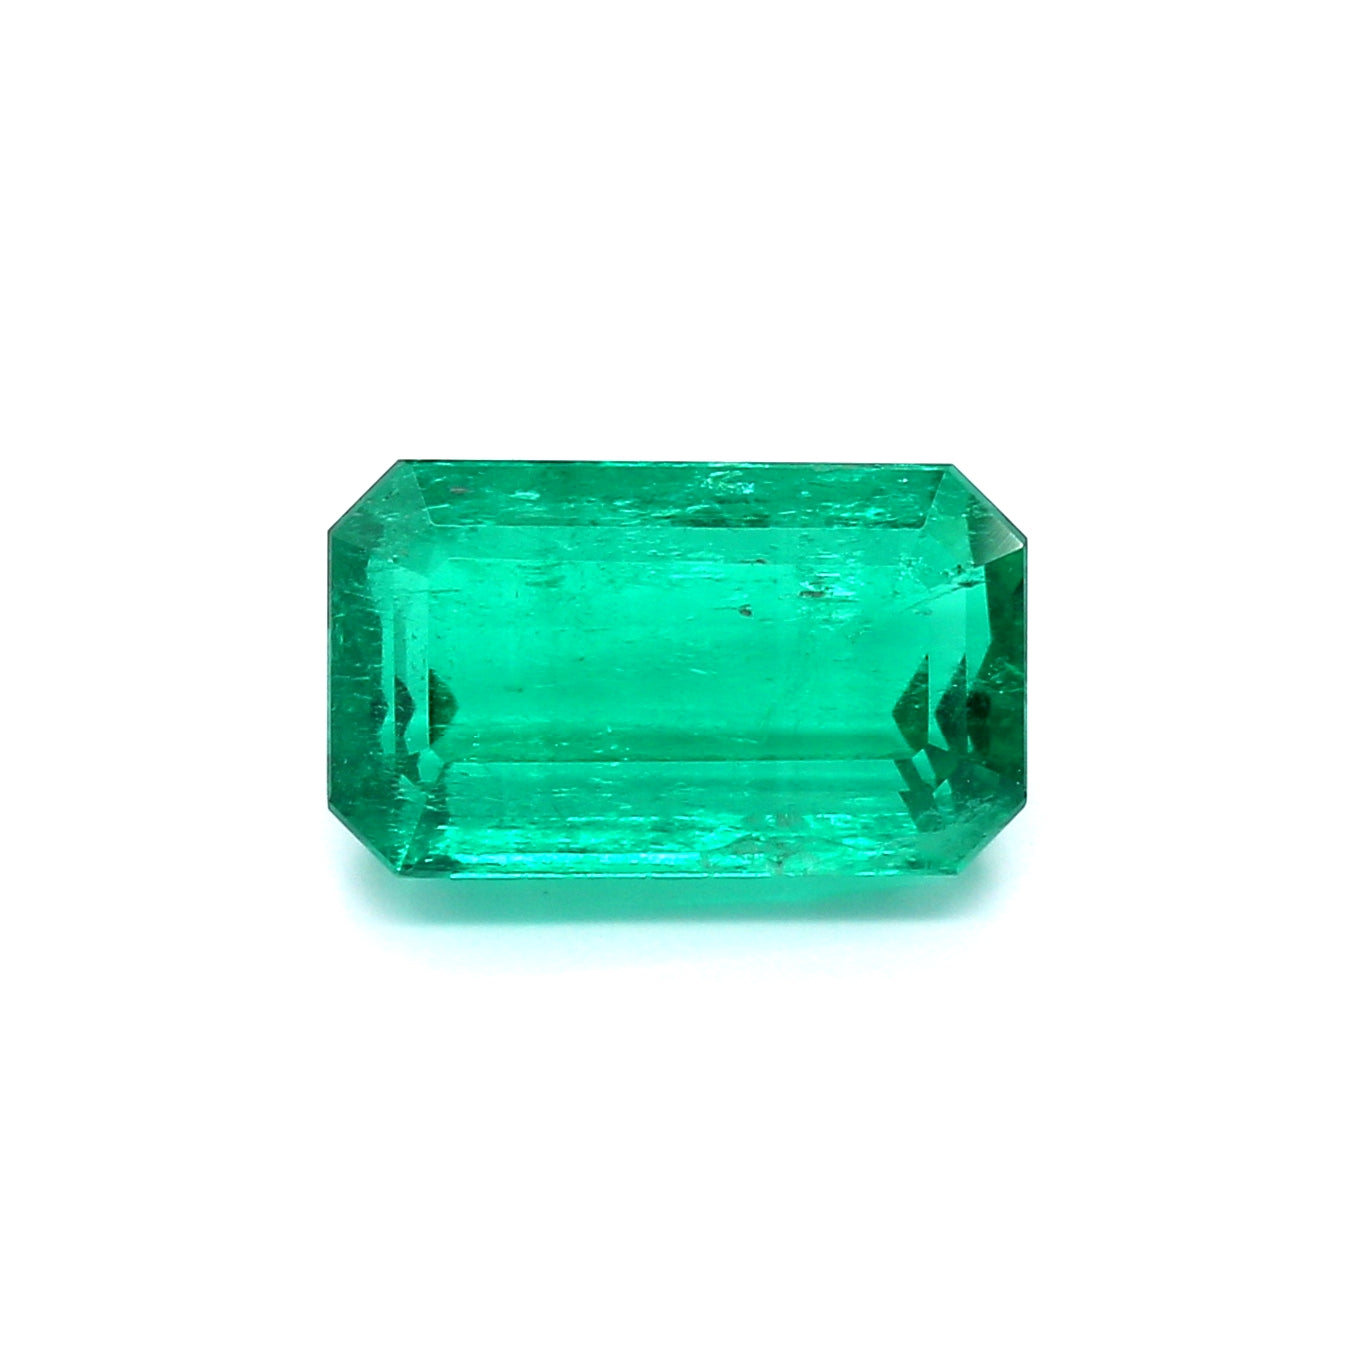 4.12ct Bluish Green, Octagon Emerald, Oiled, Colombia - 12.12 x 7.30 x 5.32mm